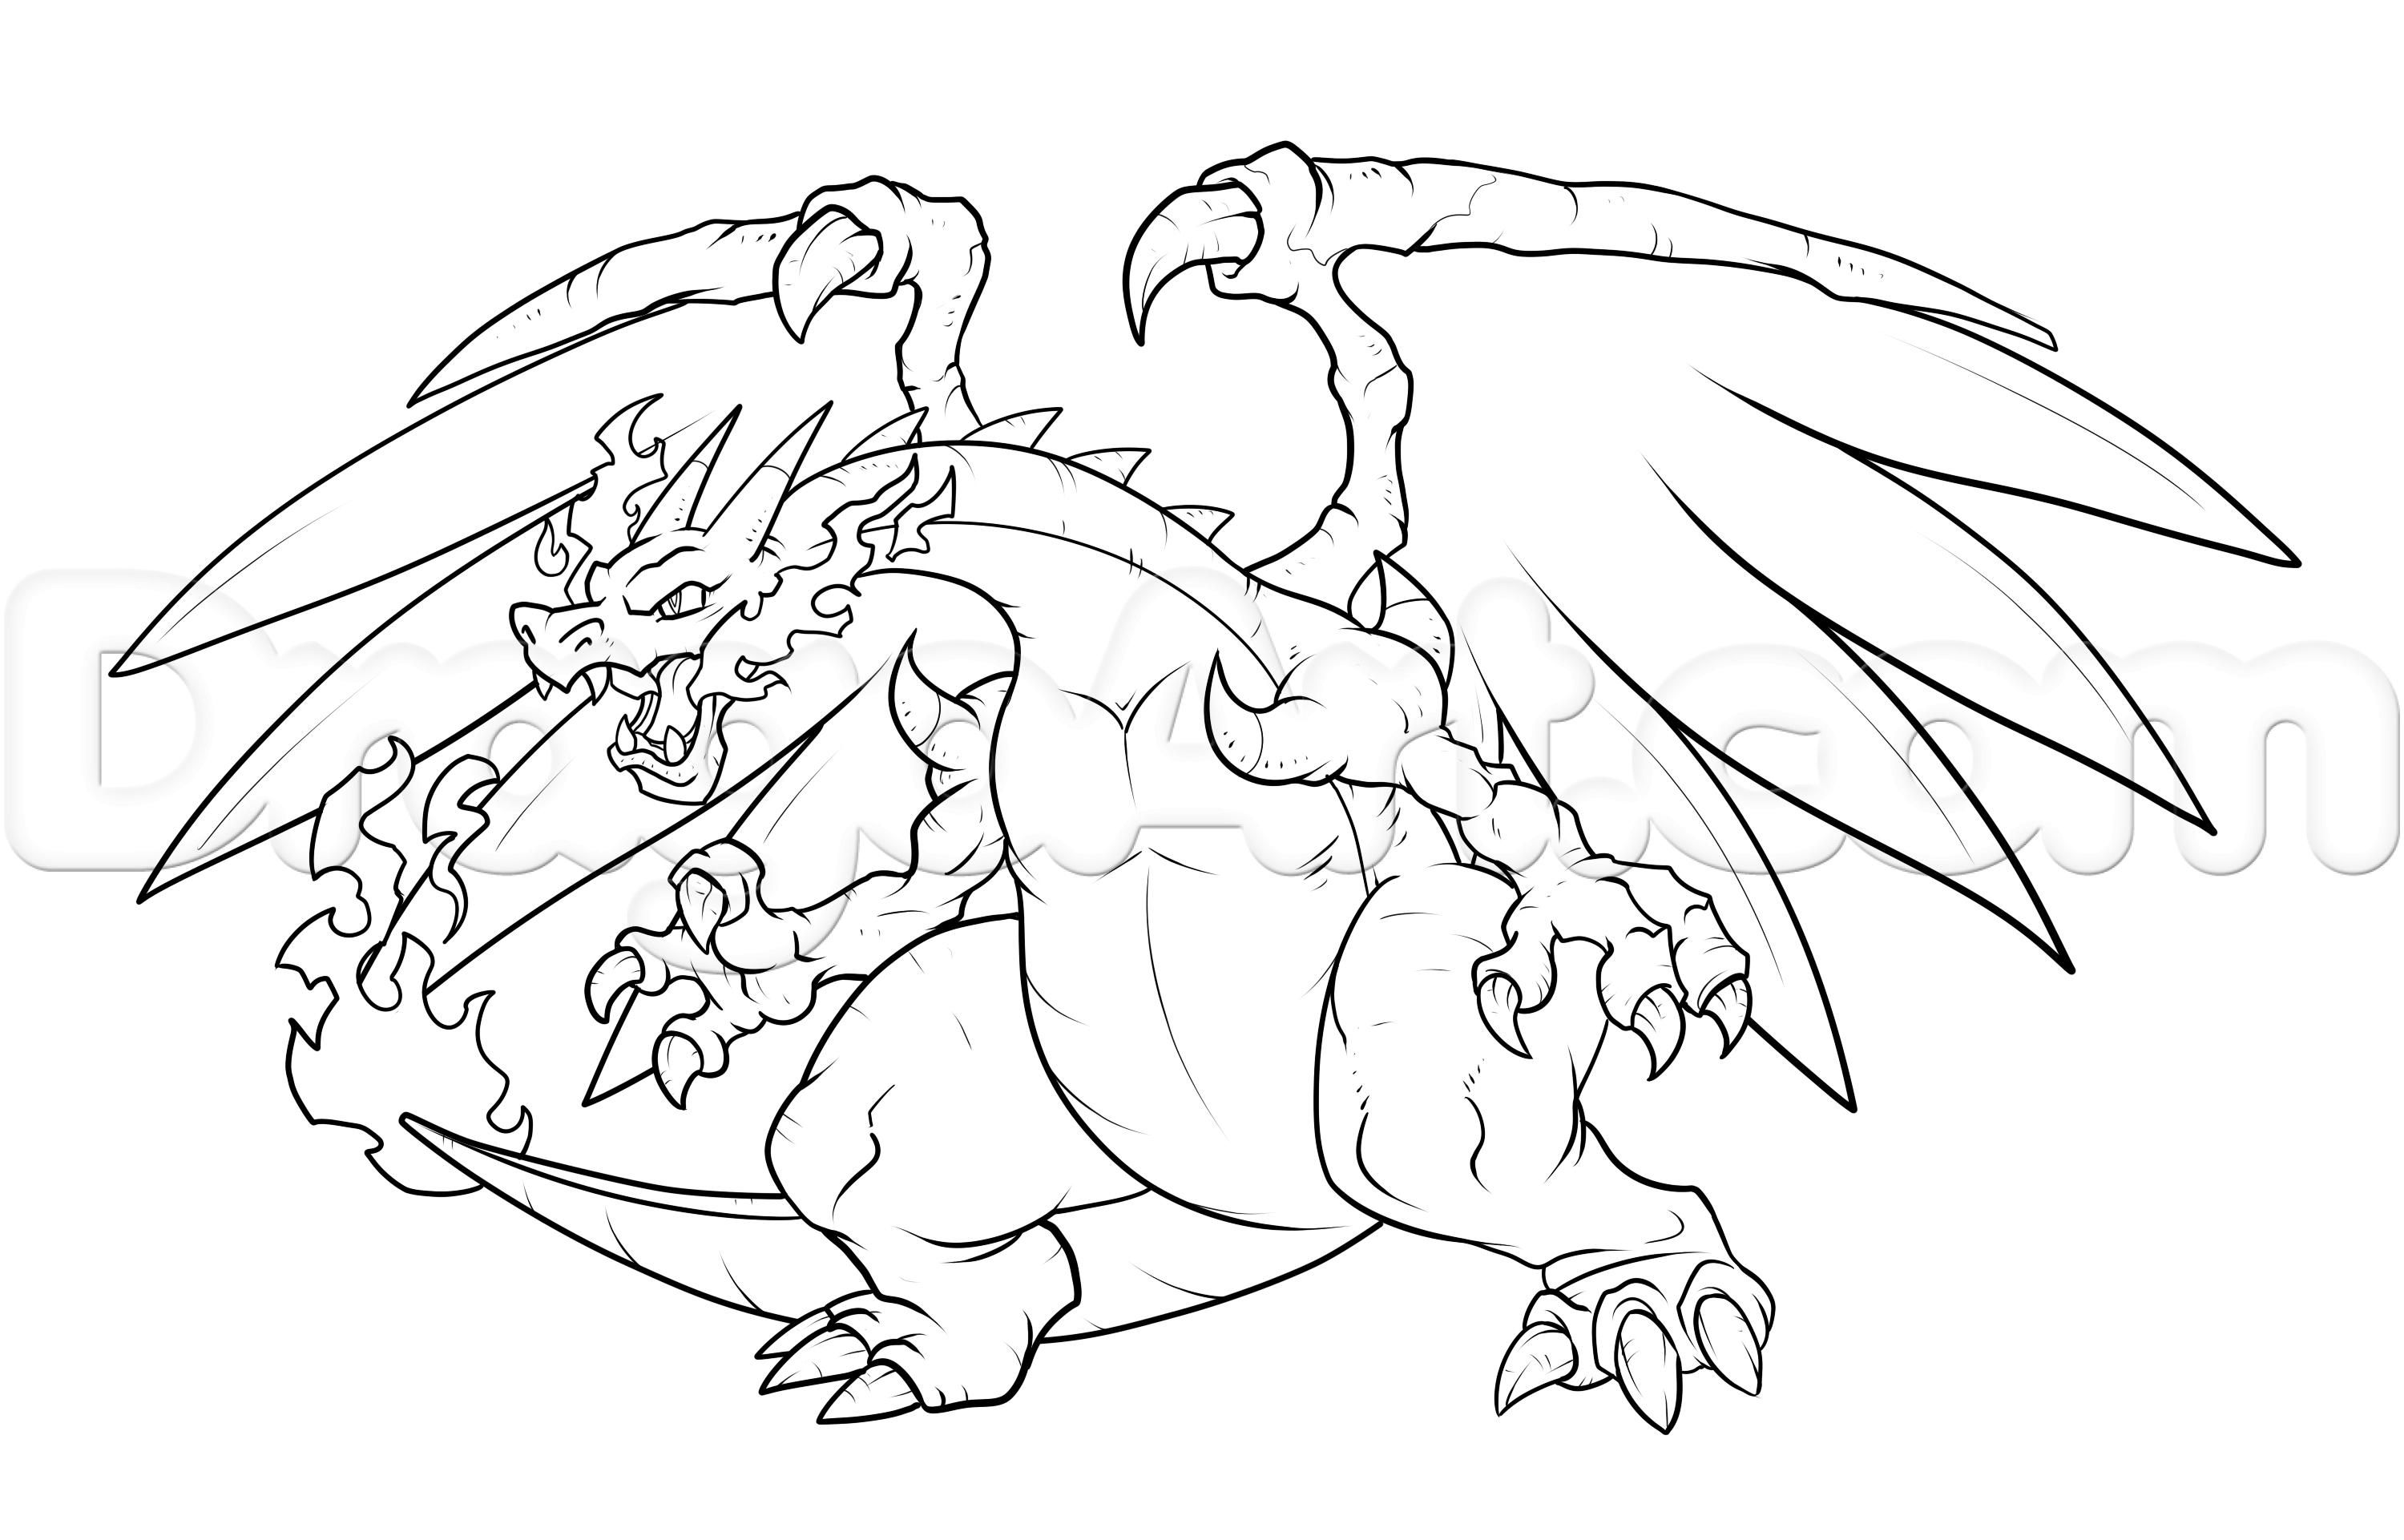 Pokemon Coloring Pages Mega Charizard Ex - Coloring Page - Coloring Home